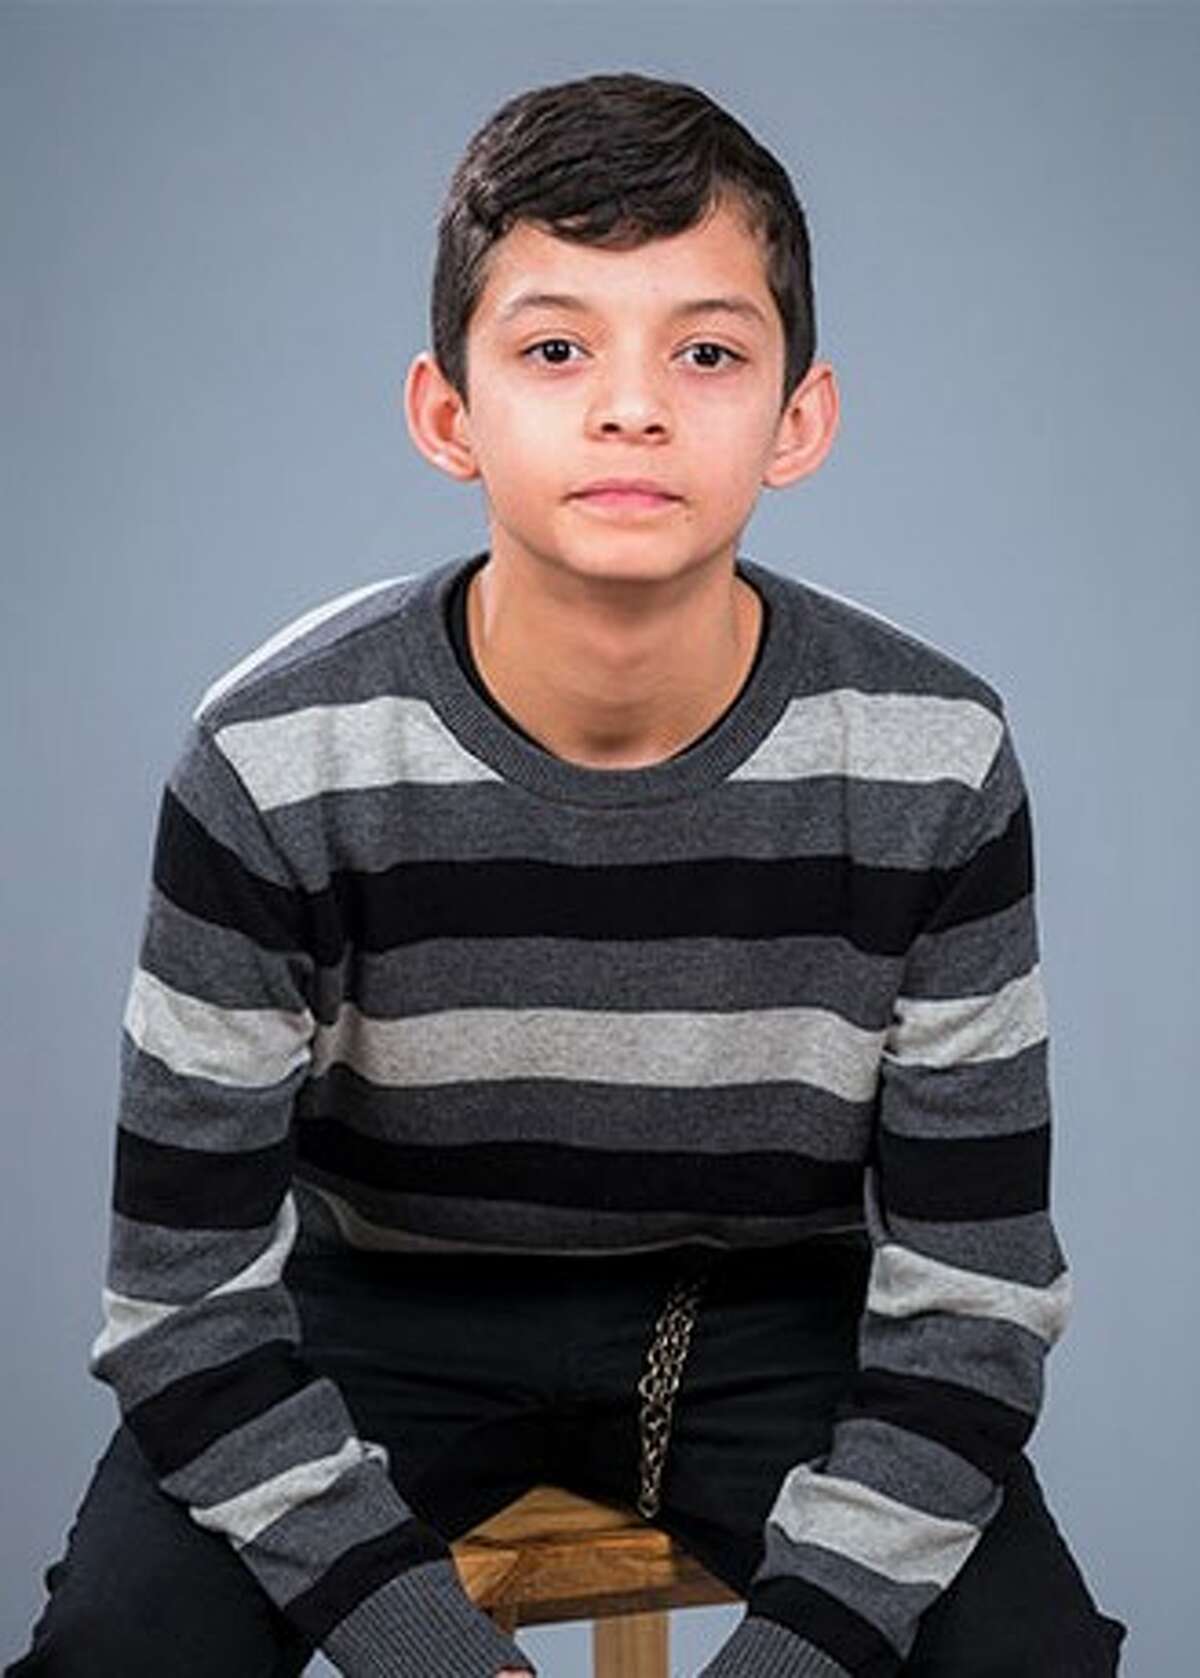 Justin is among the children listed on the Texas Adoption Resource Exchange (TARE) website. Visit https://www.dfps.state.tx.us/Application/TARE/Home.aspx/Default for more details.